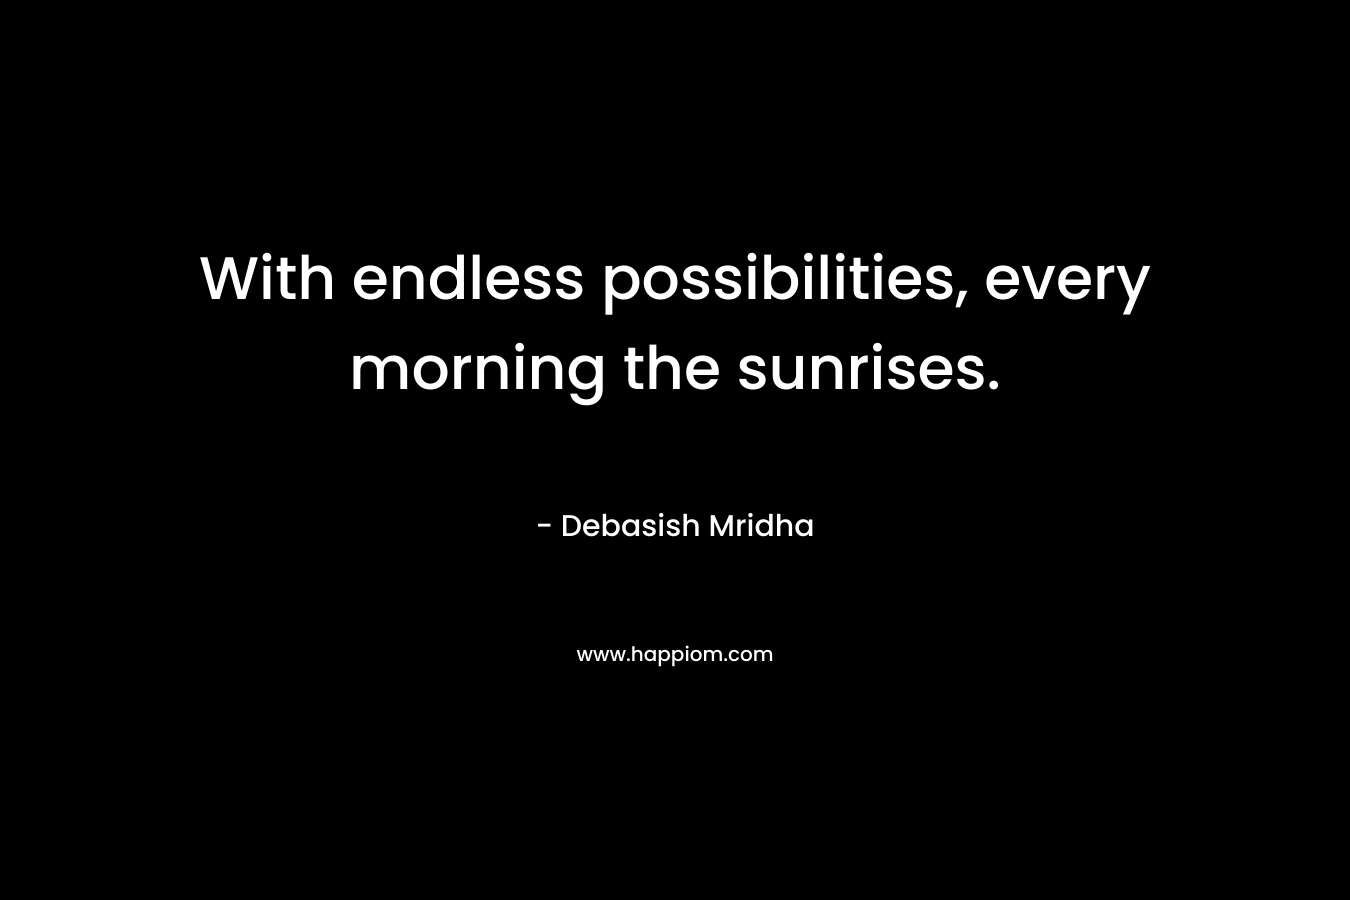 With endless possibilities, every morning the sunrises.